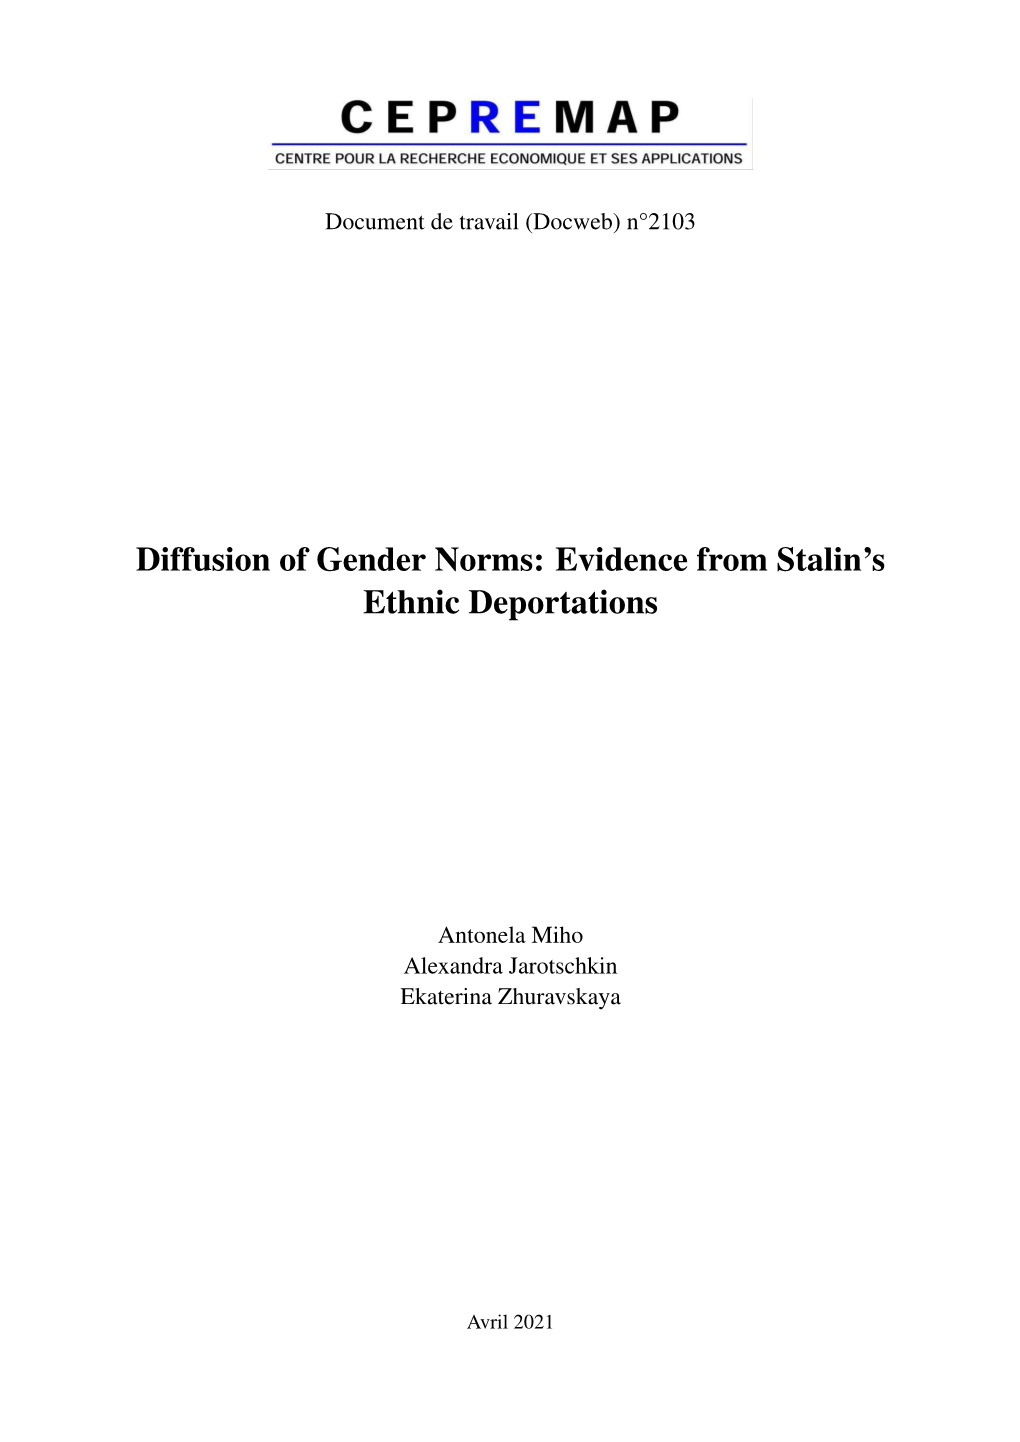 Diffusion of Gender Norms: Evidence from Stalin's Ethnic Deportations